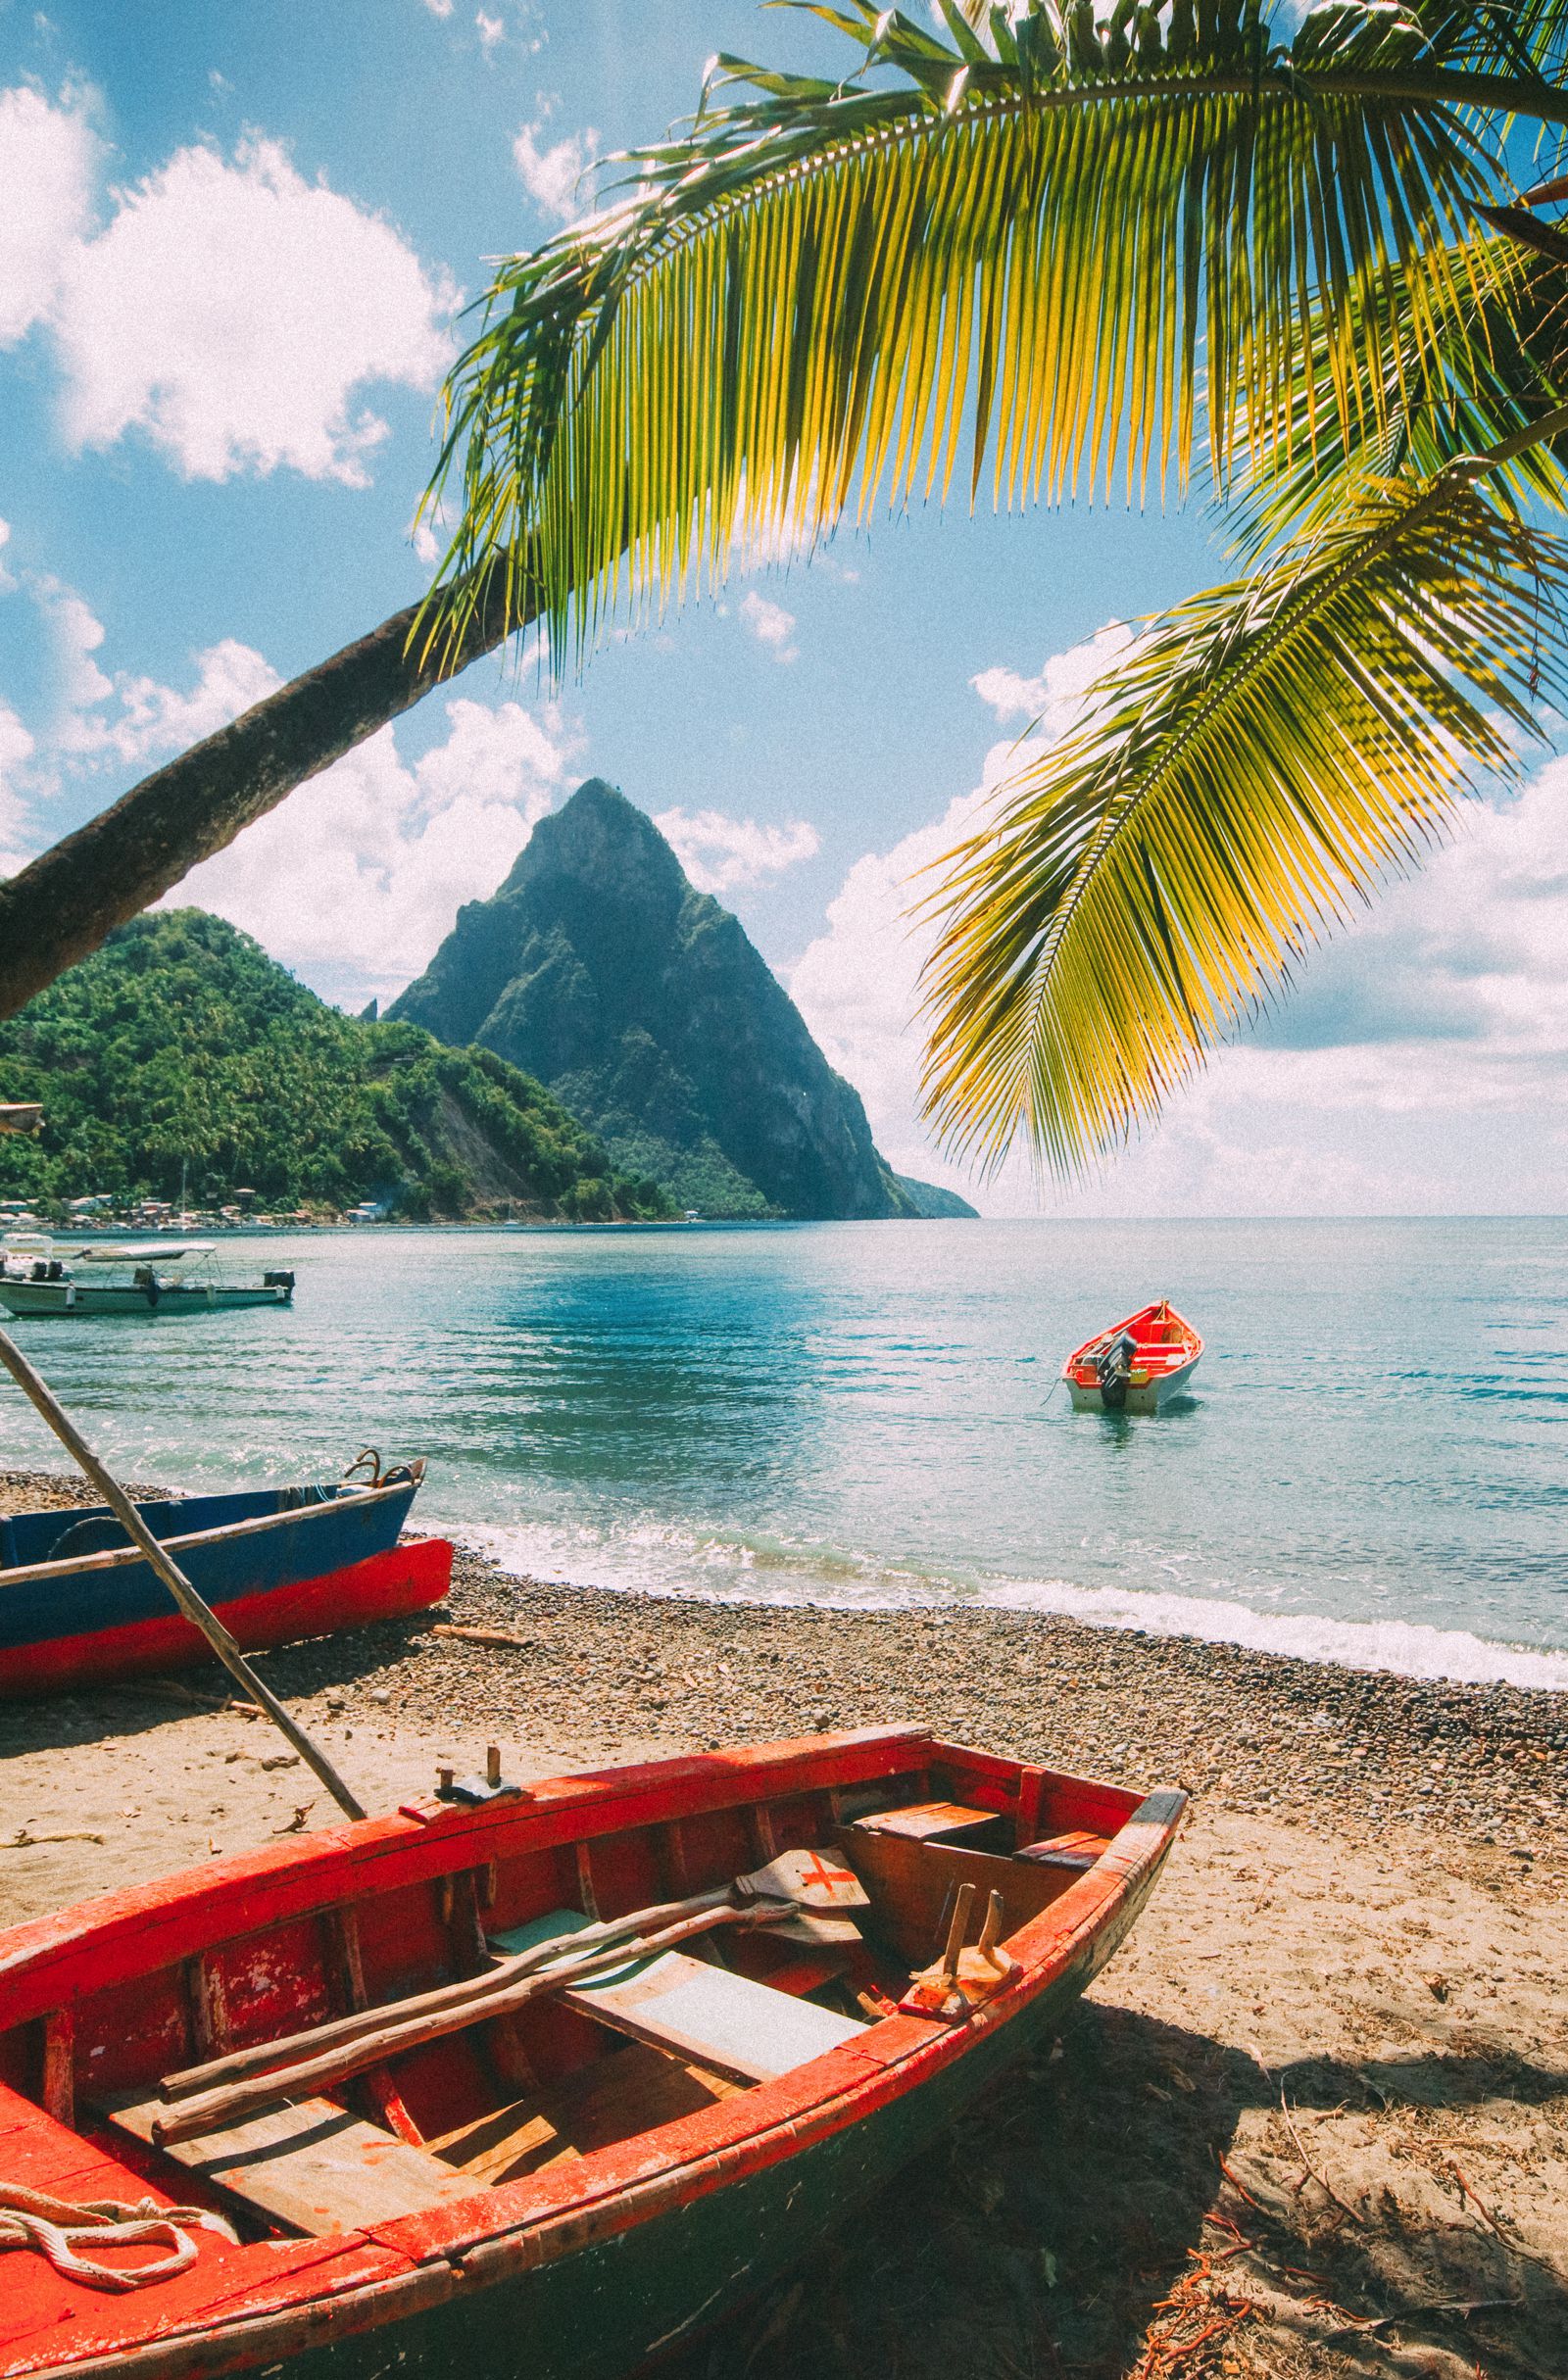 11 Fantastic Places To Visit In The Caribbean Island Of St Lucia (6)